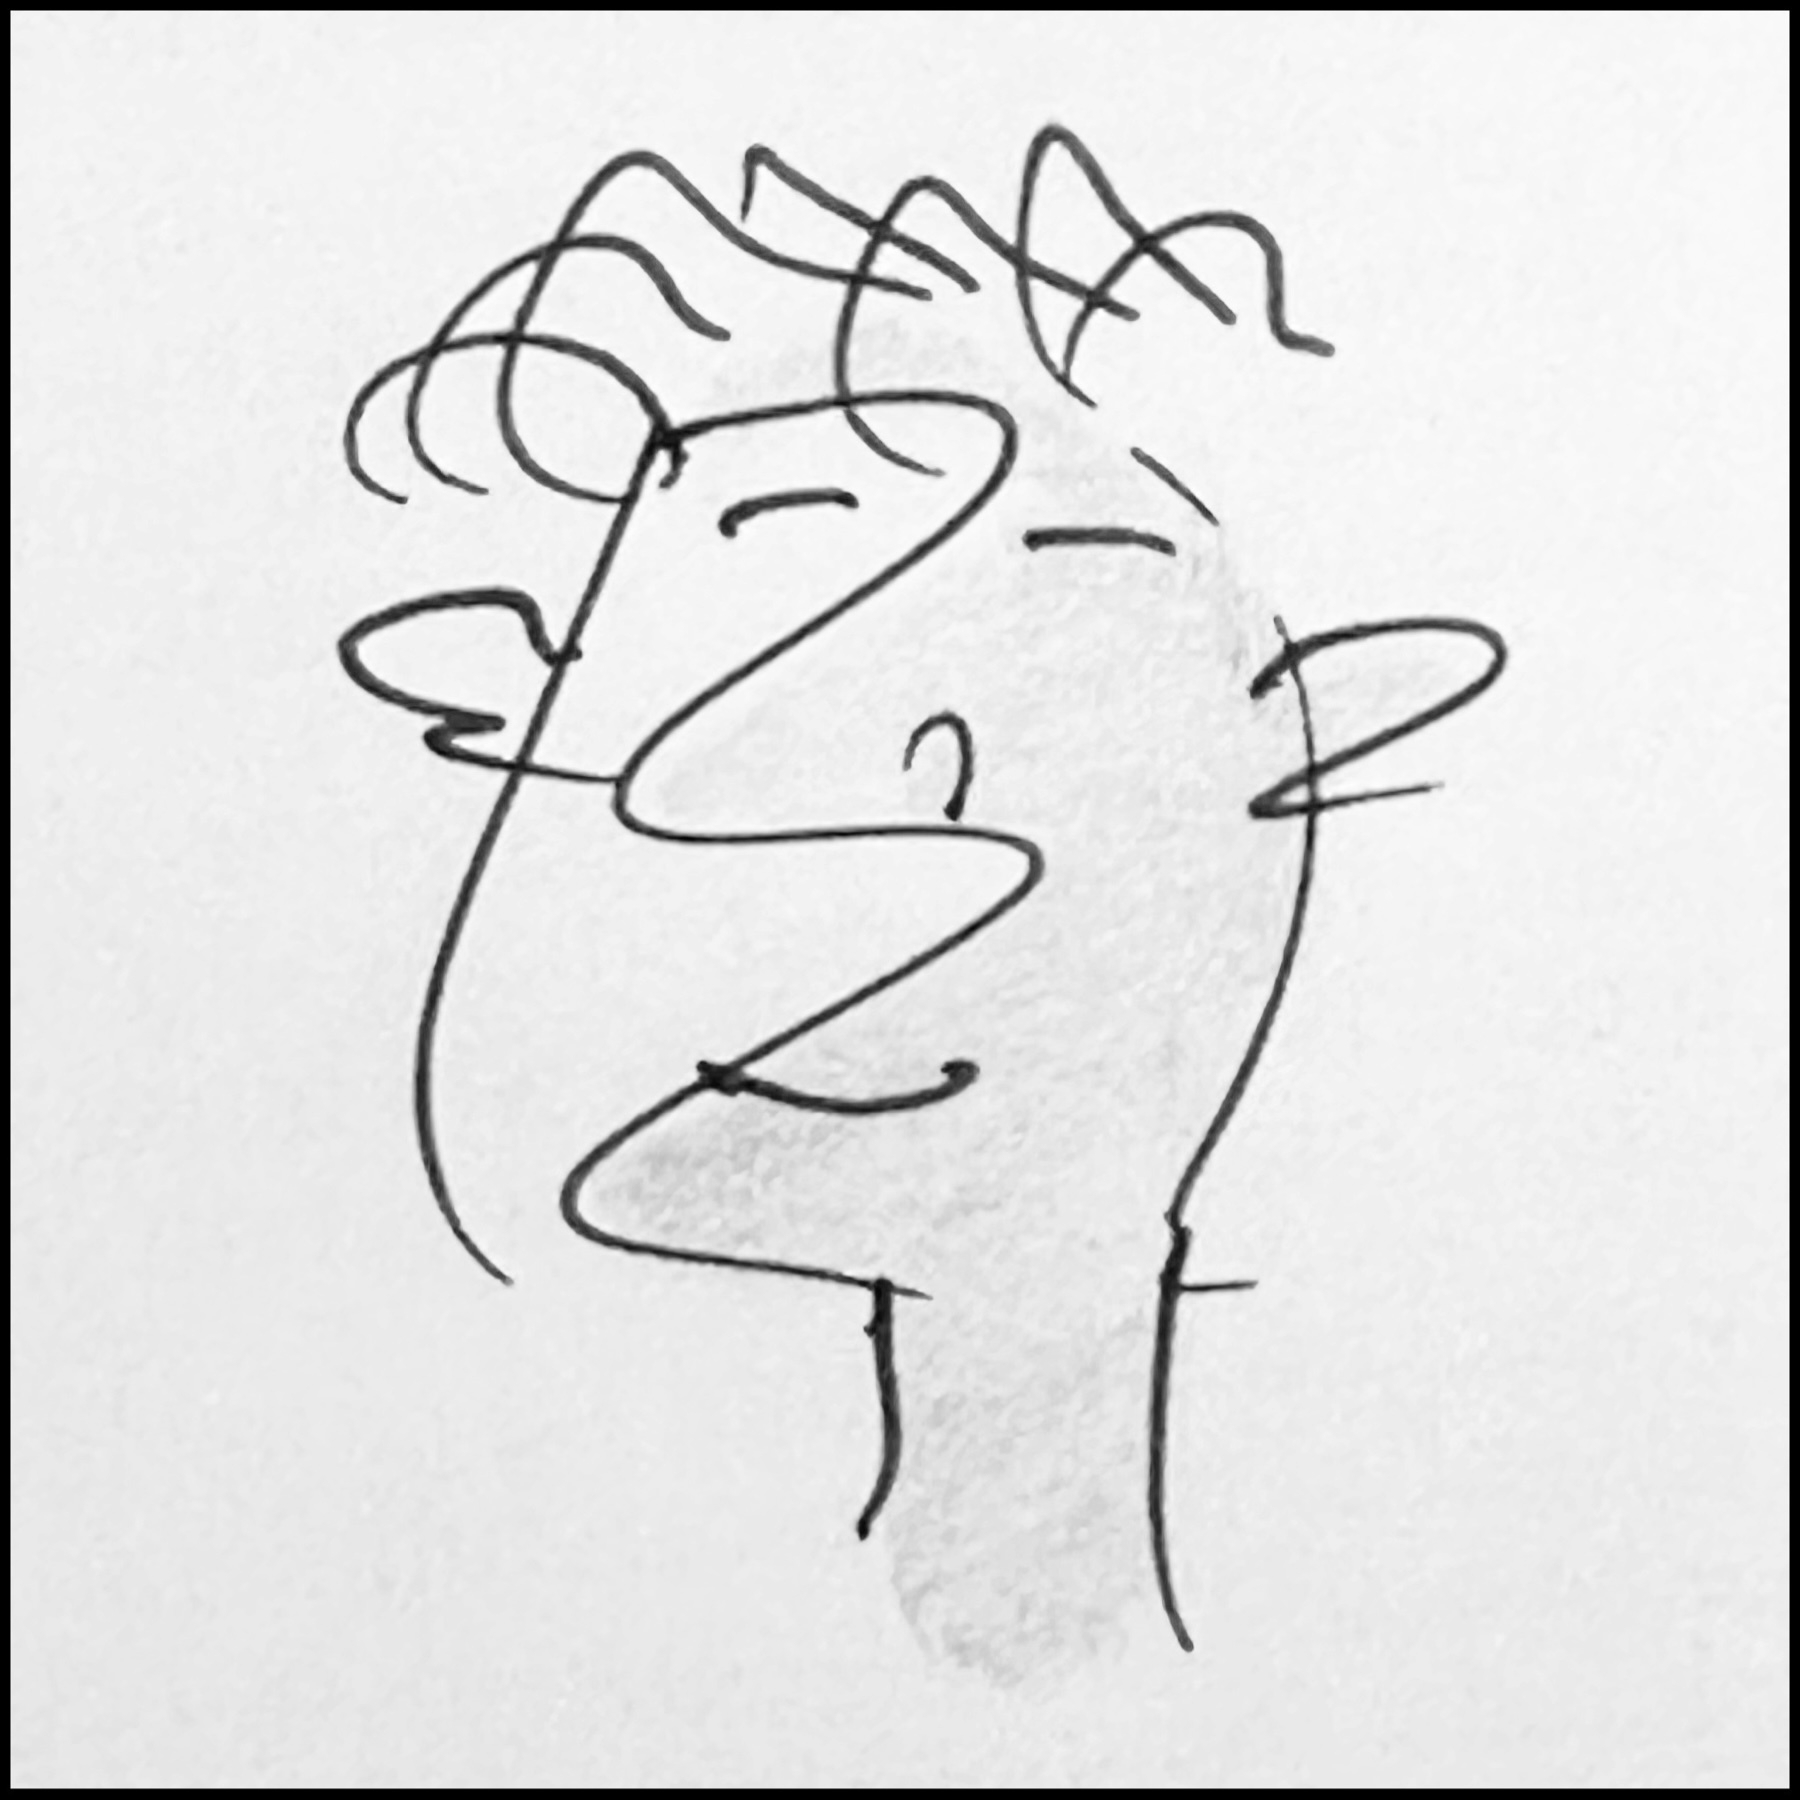 A simple line drawing of a person's face on a white background.